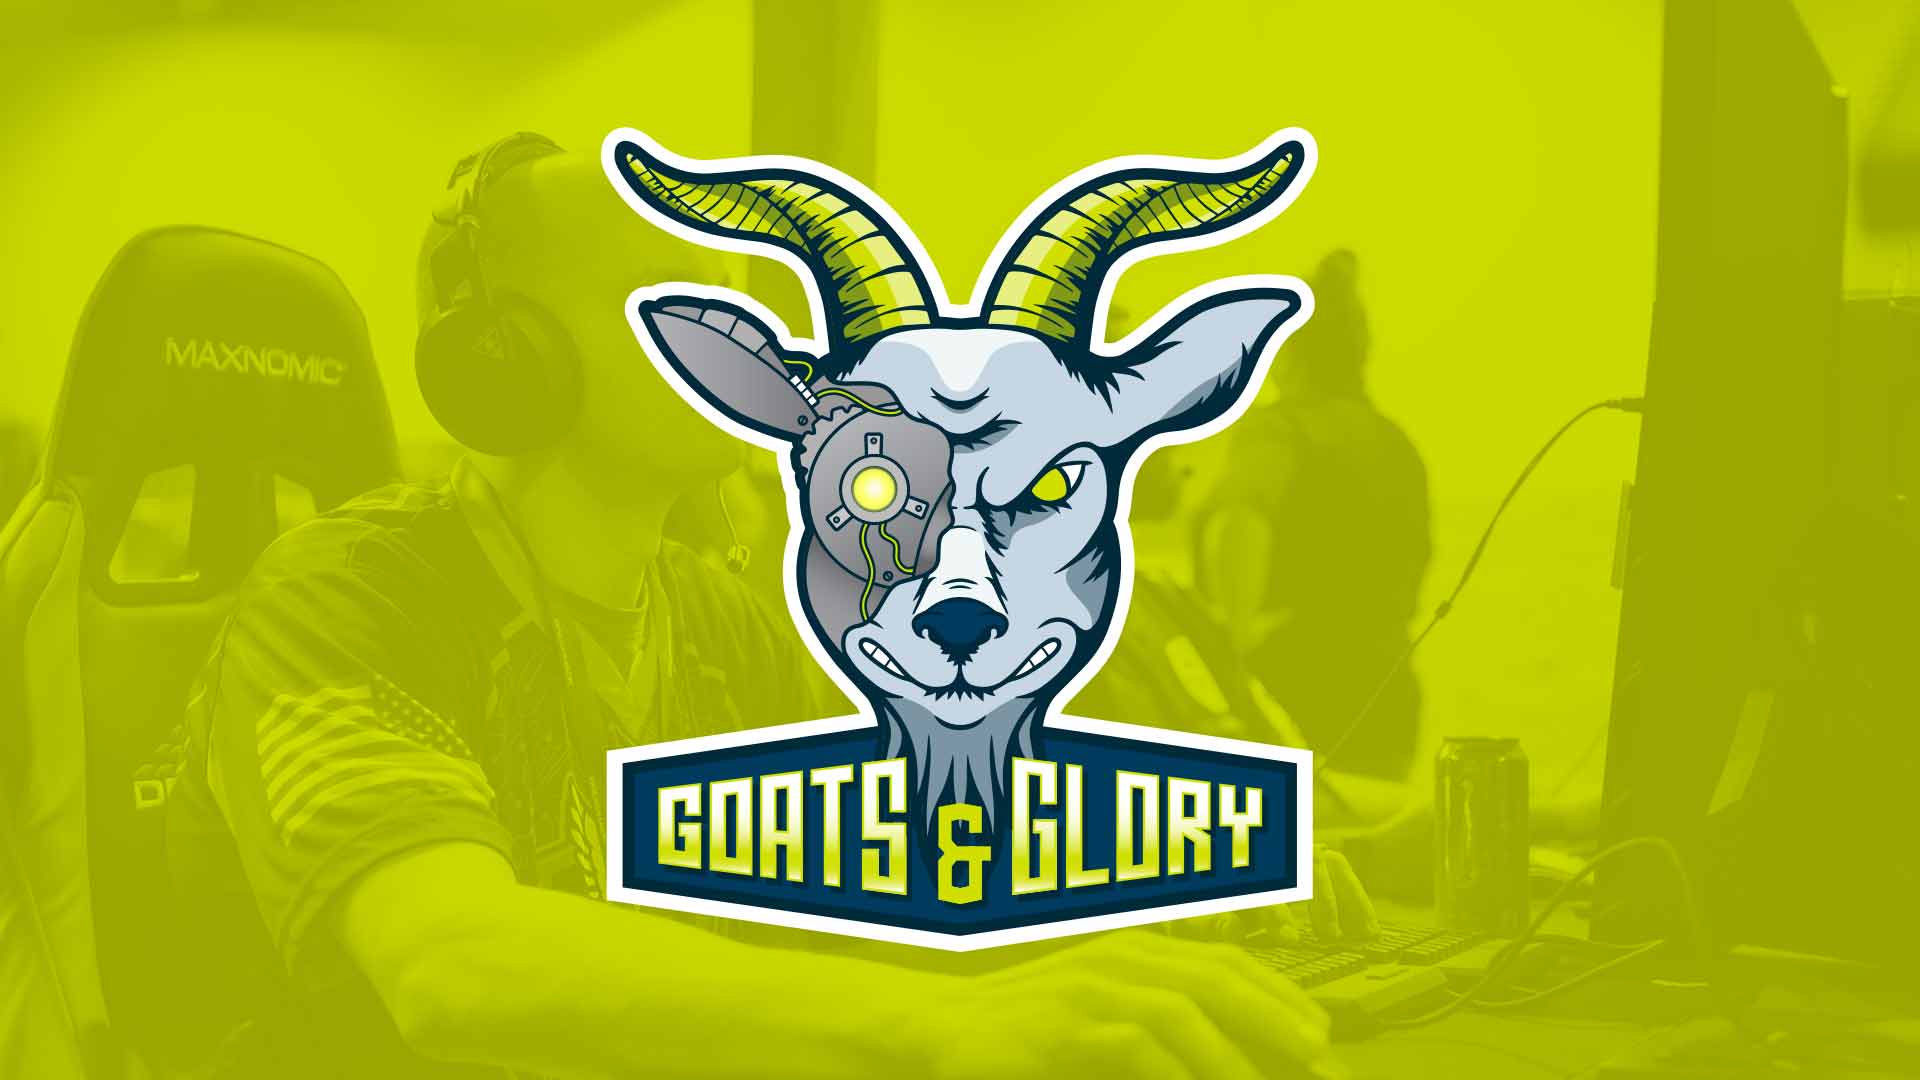 America’s Navy’s first ever esports team, Goats & Glory  